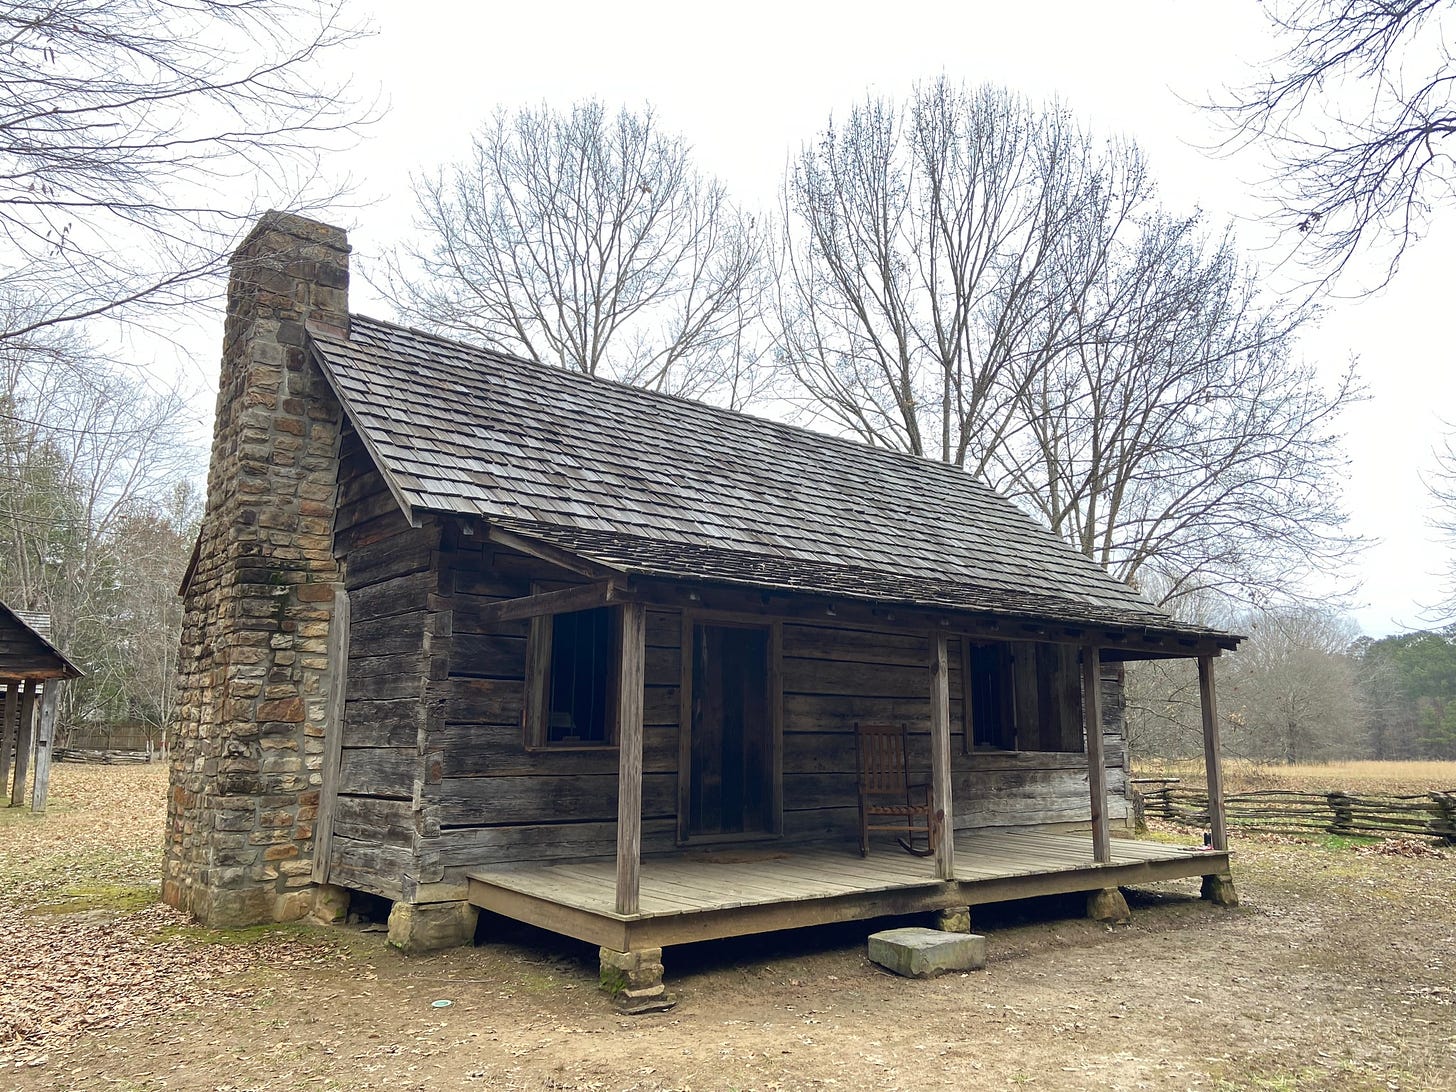 Picture of cabin at New Echota Historic Site